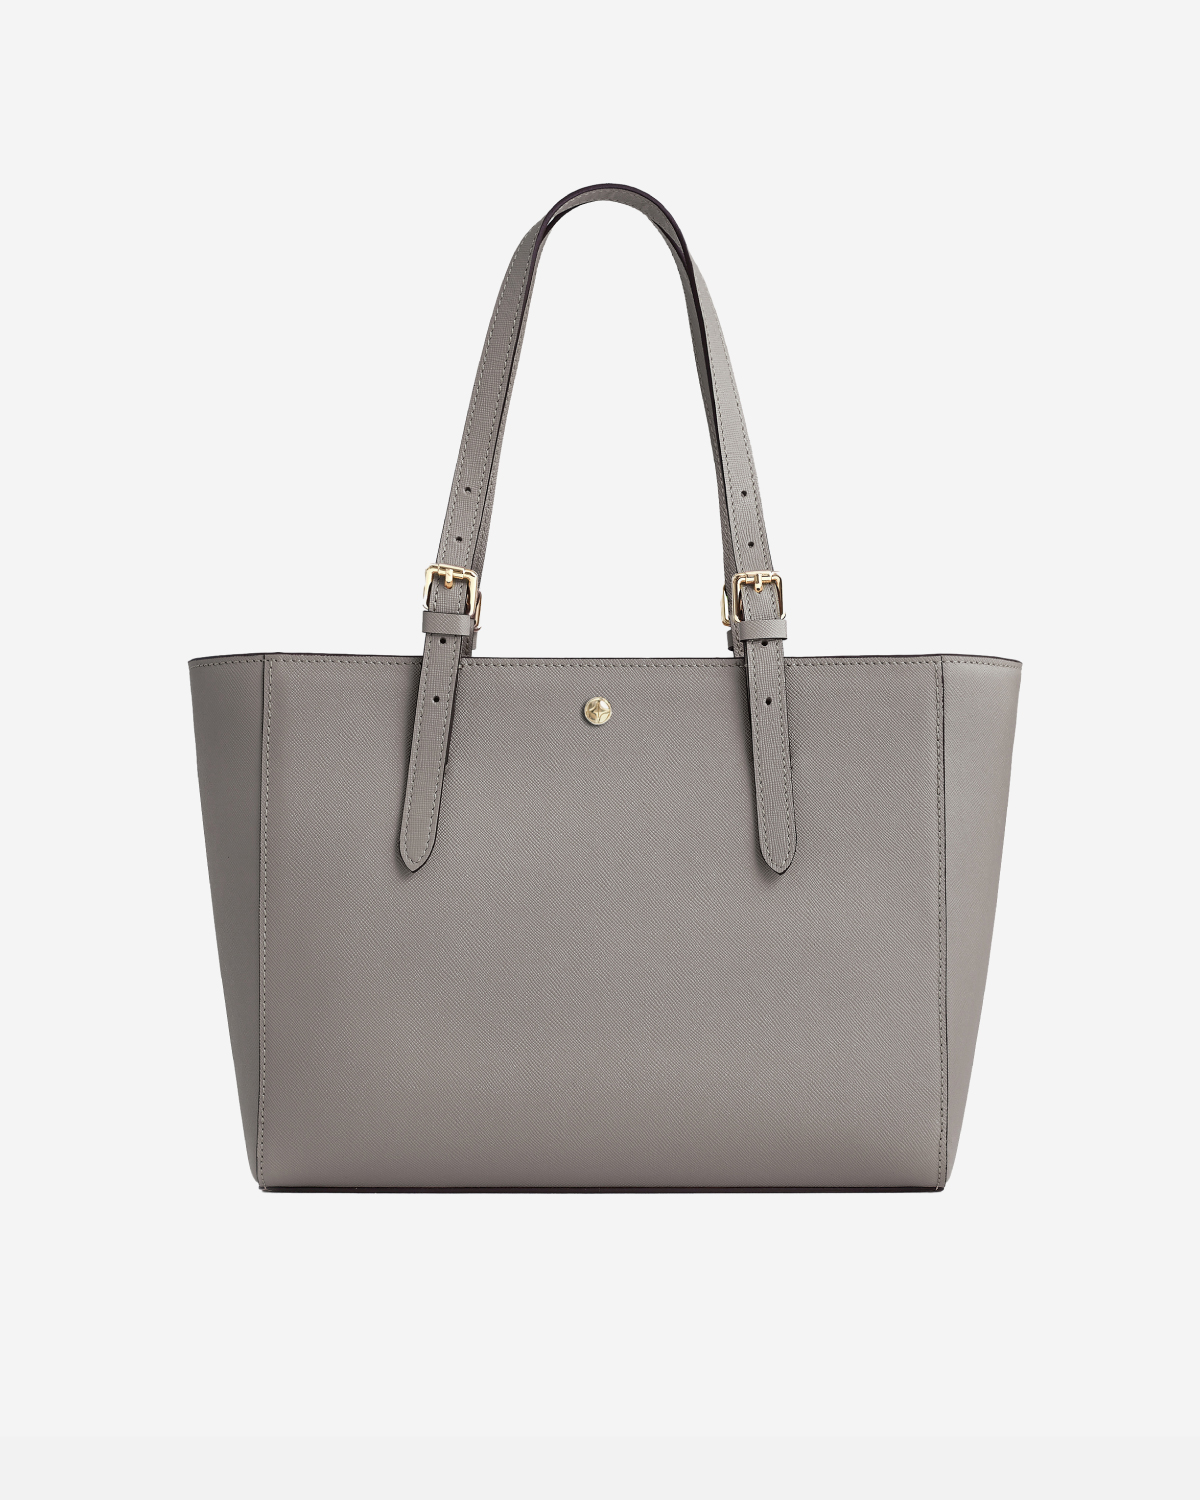 VERA The First Bag in Taupe